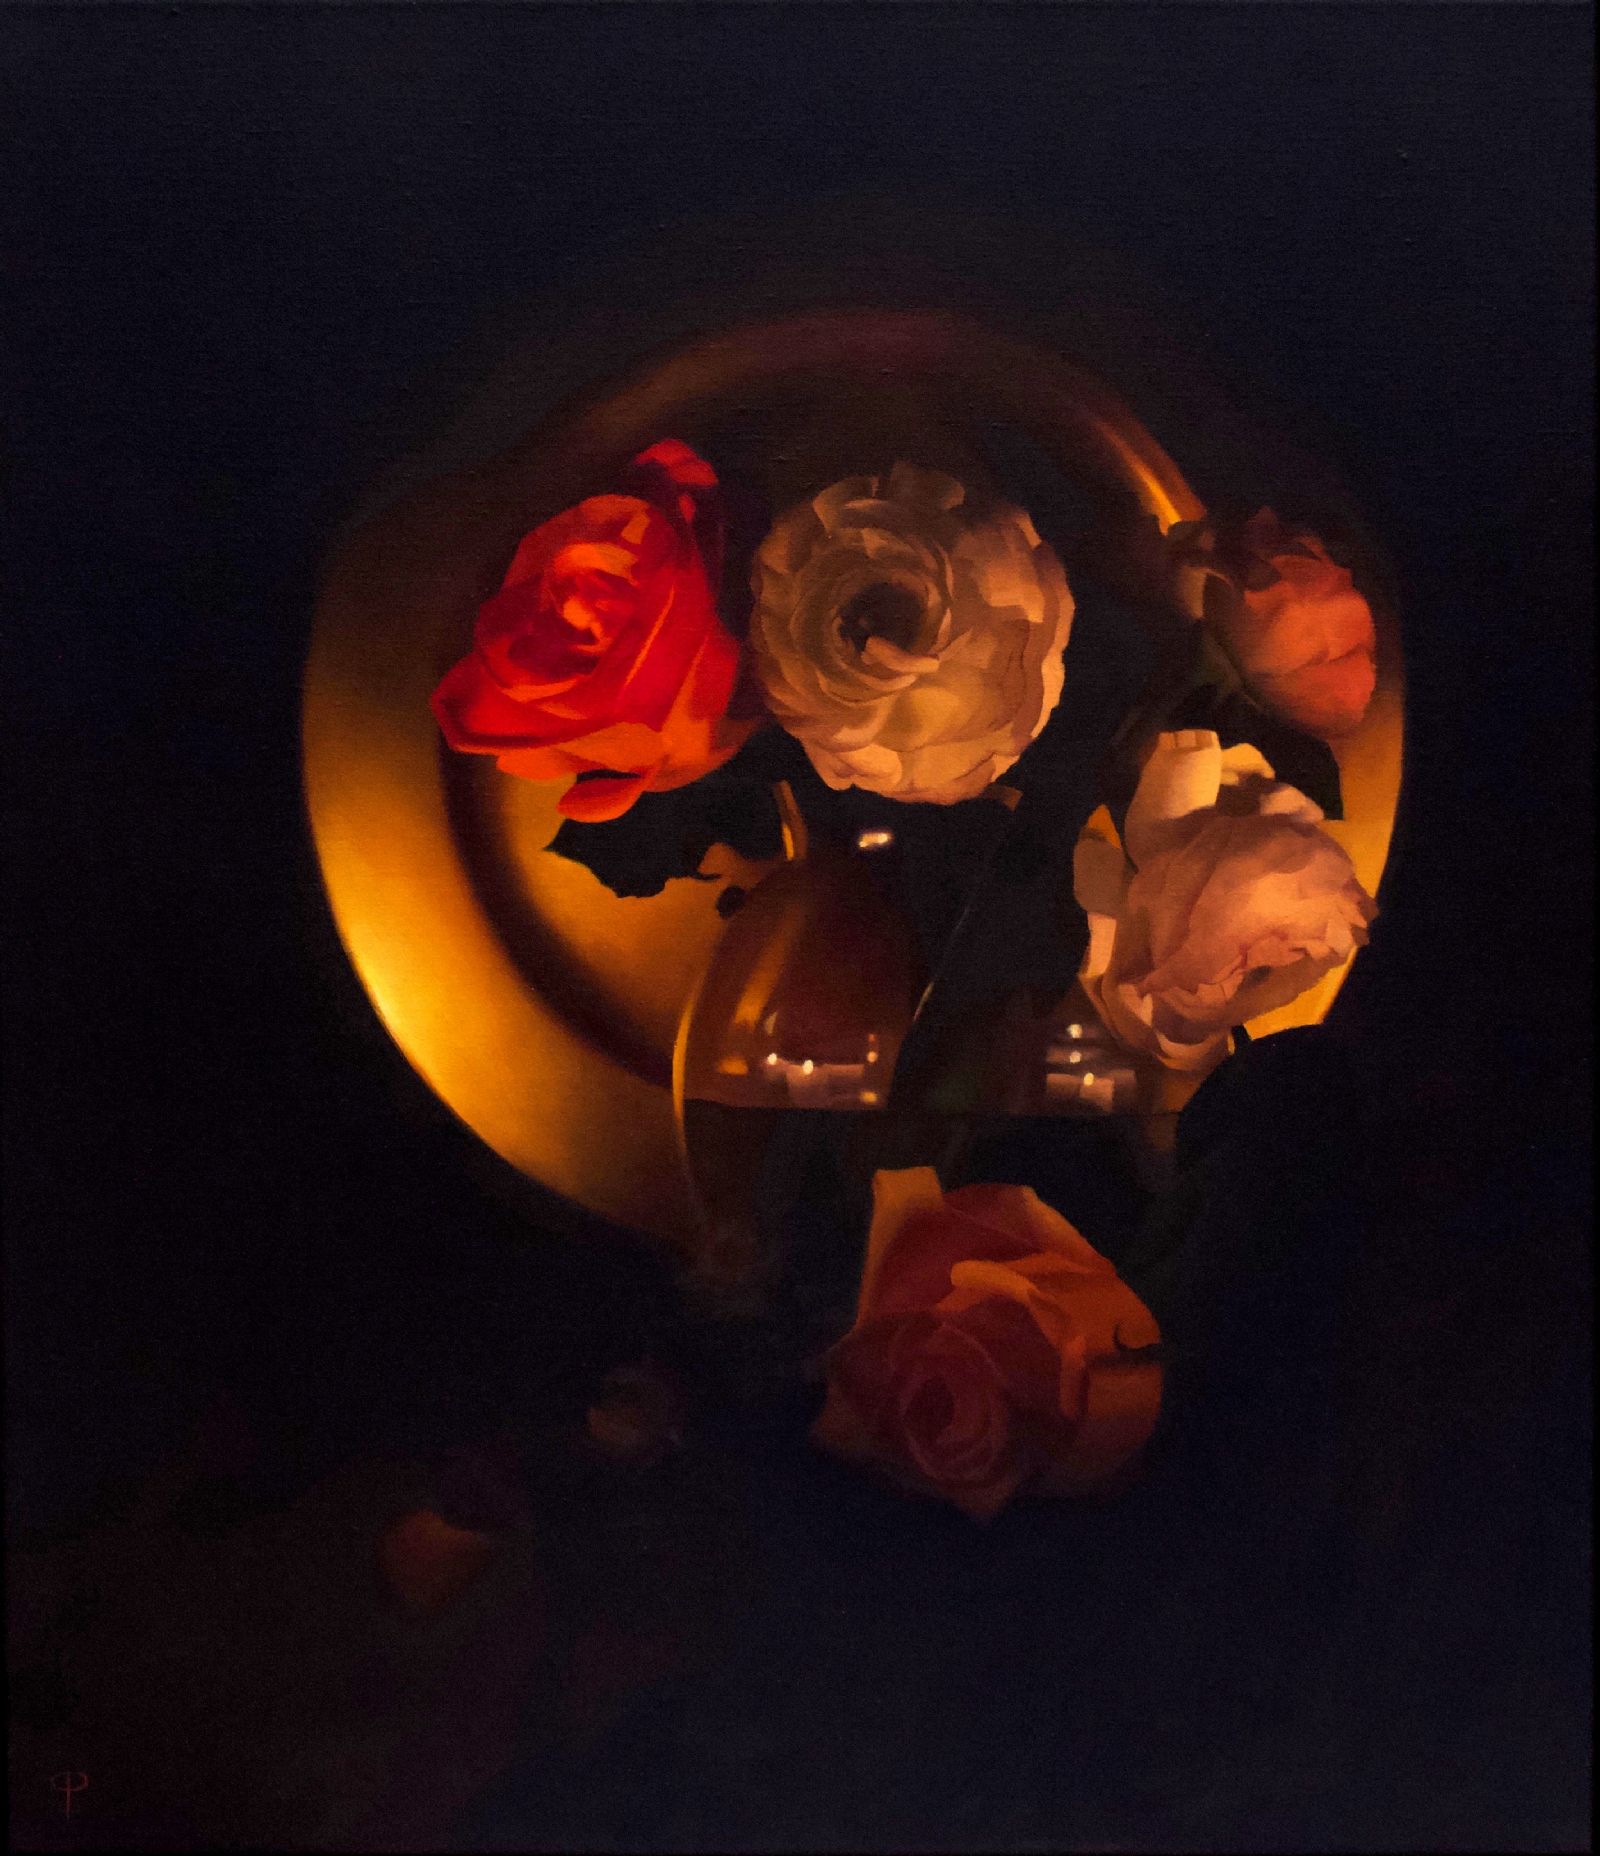 Flowers by Candlelight III by Chris Polunin